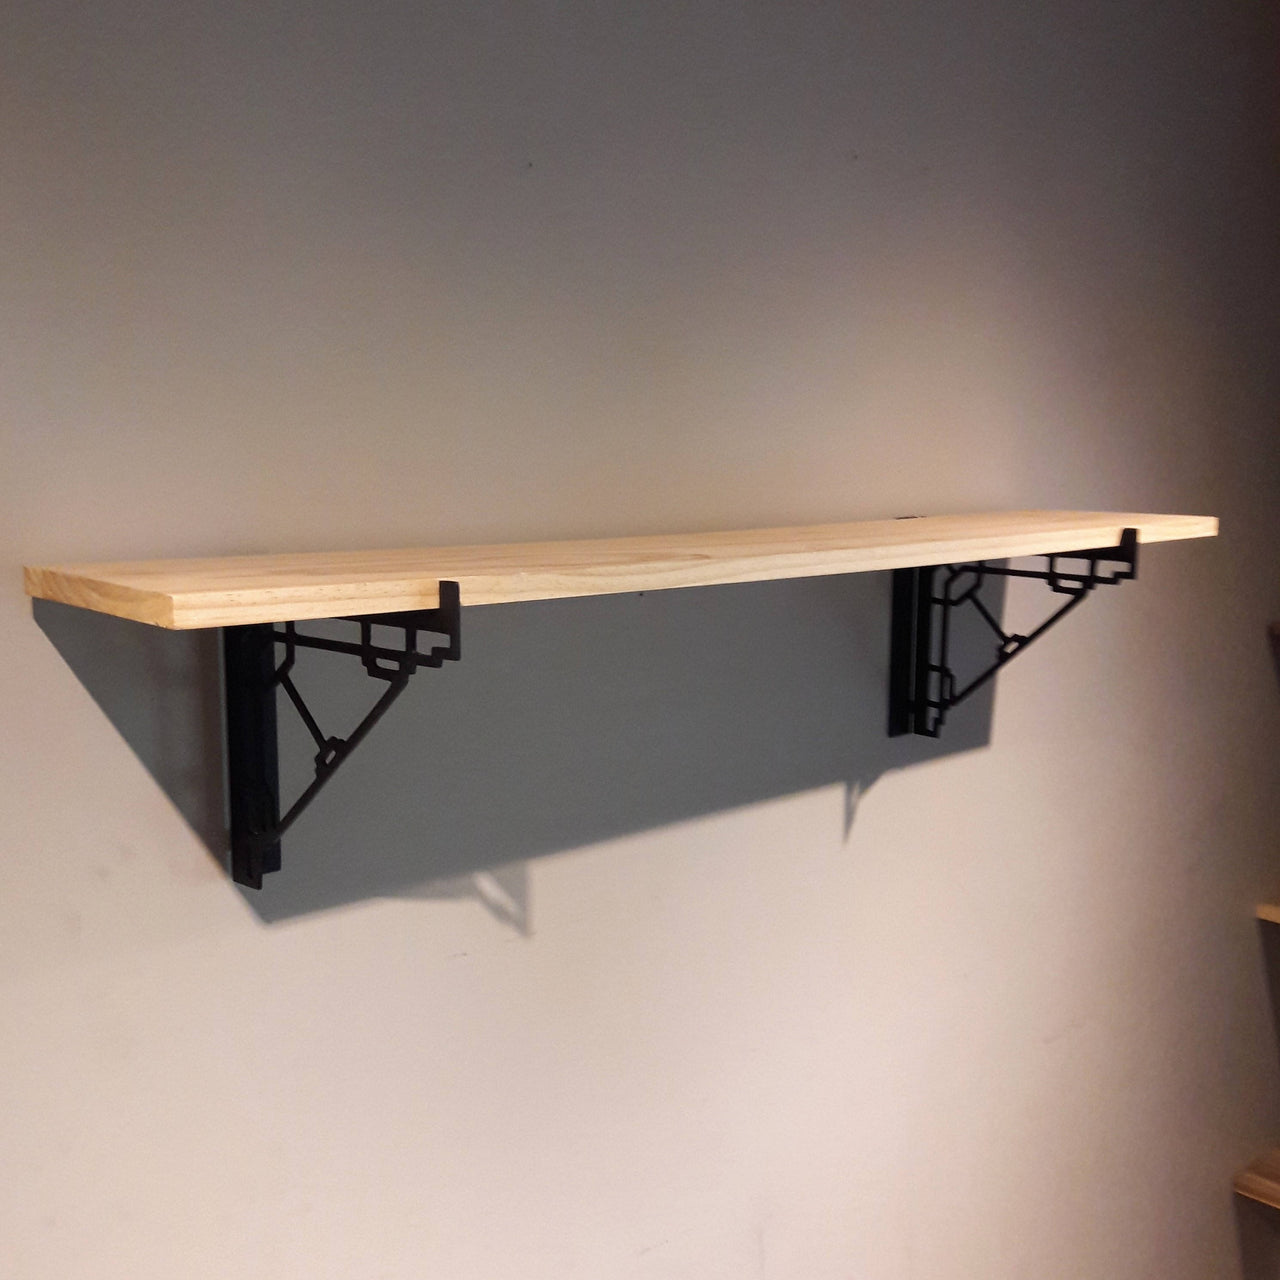 These metal shelf brackets are a contemporary design and fit standard lumber sizes